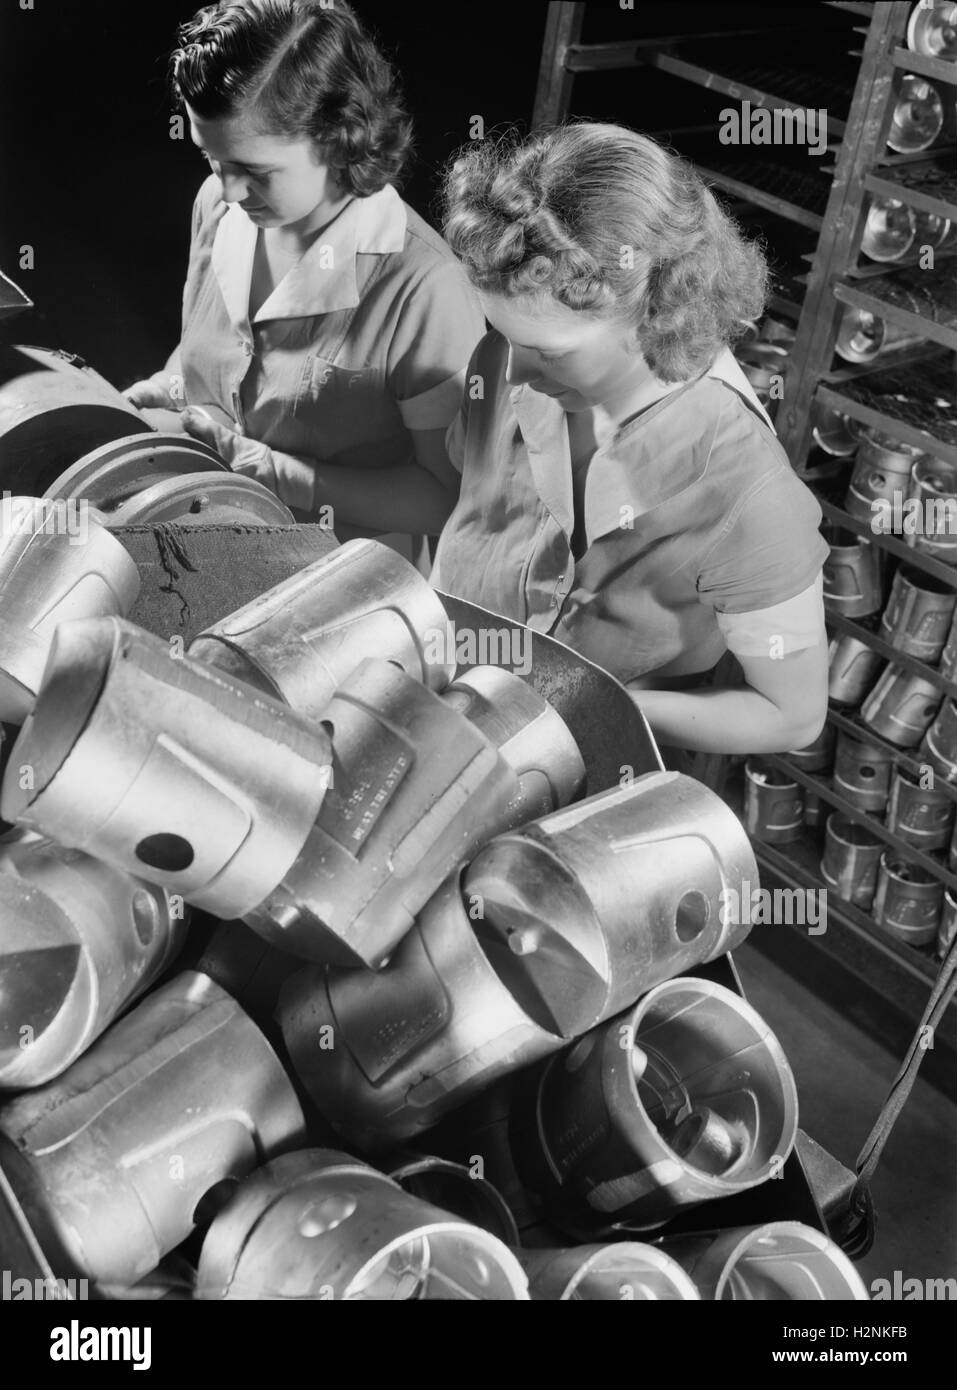 Two Female Workers Inspecting Heat-Treated Pistons prior to Brinnell hardness Testing at Aluminum Factory Converted to War Production, Aluminum Industries, Inc., Cincinnati, Ohio, USA, Alfred T. Palmer for Office of War Information, February 1942 Stock Photo